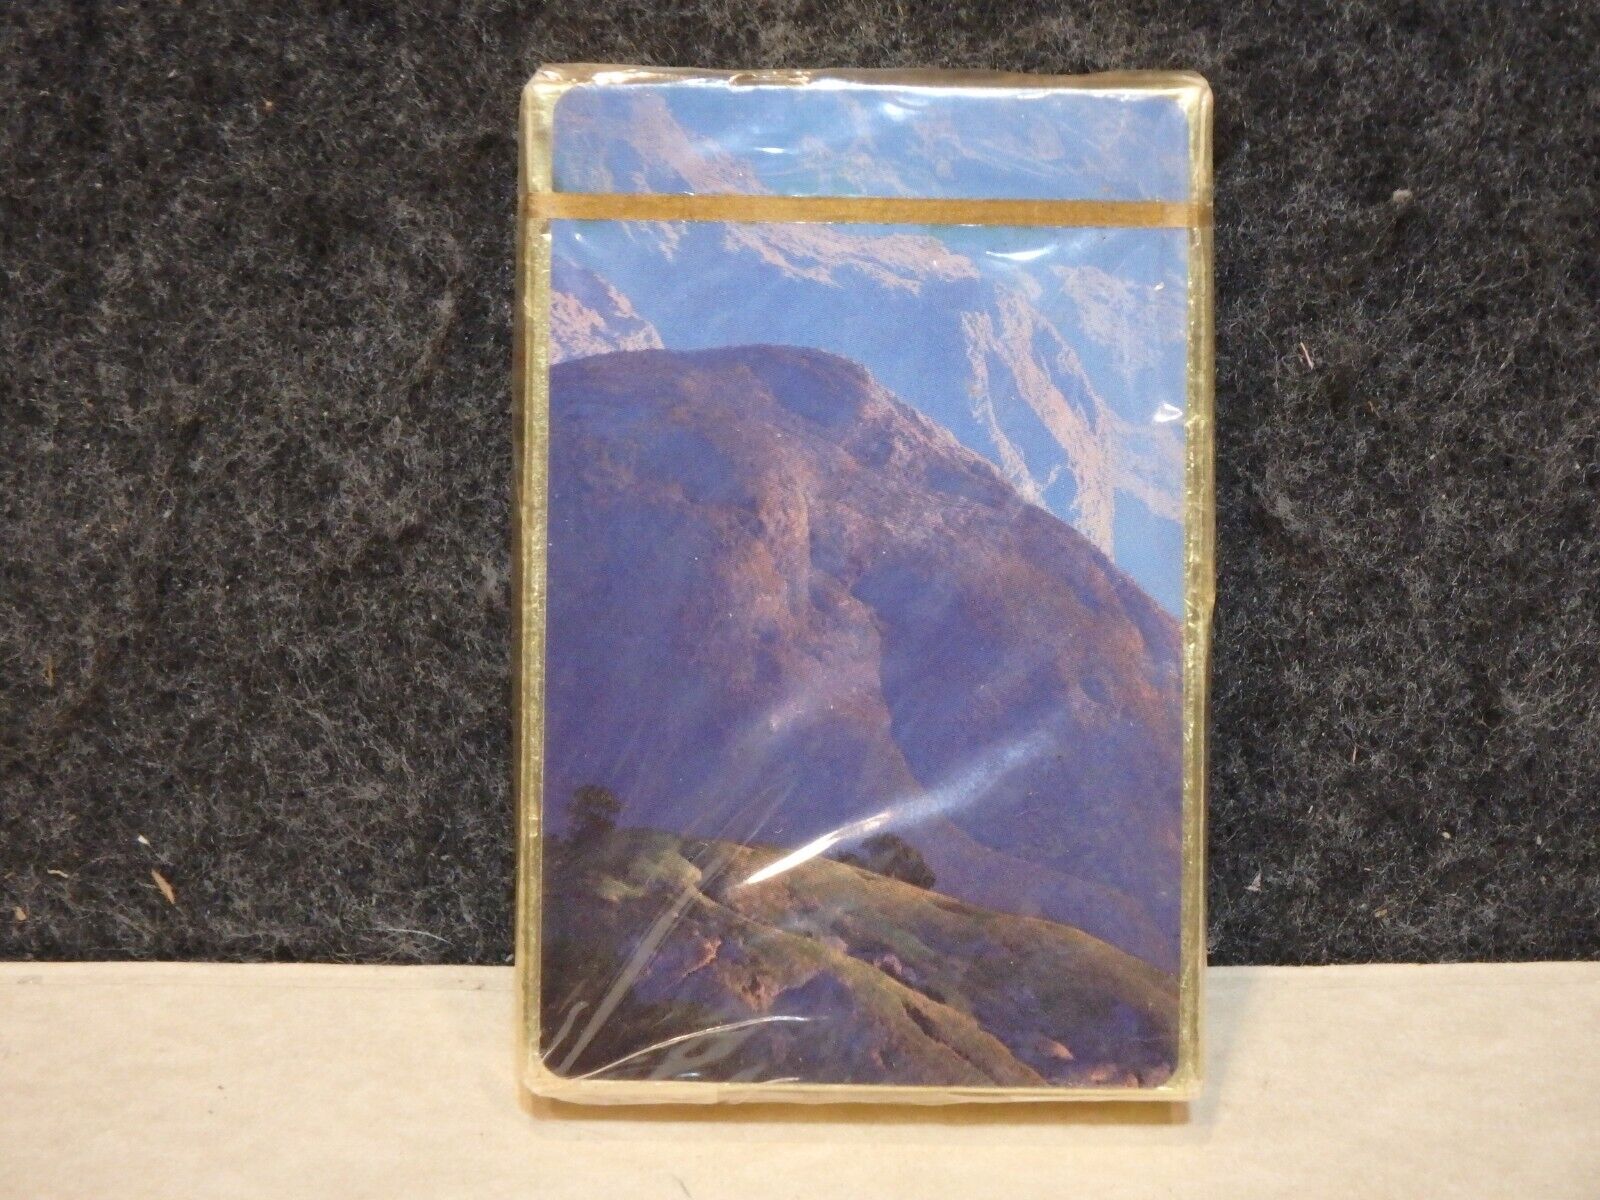 VTG SEALED DECK OF PLAYING CARDS OF MAXFIELD PARRISH IN THE MOUNTAINS #770/1000